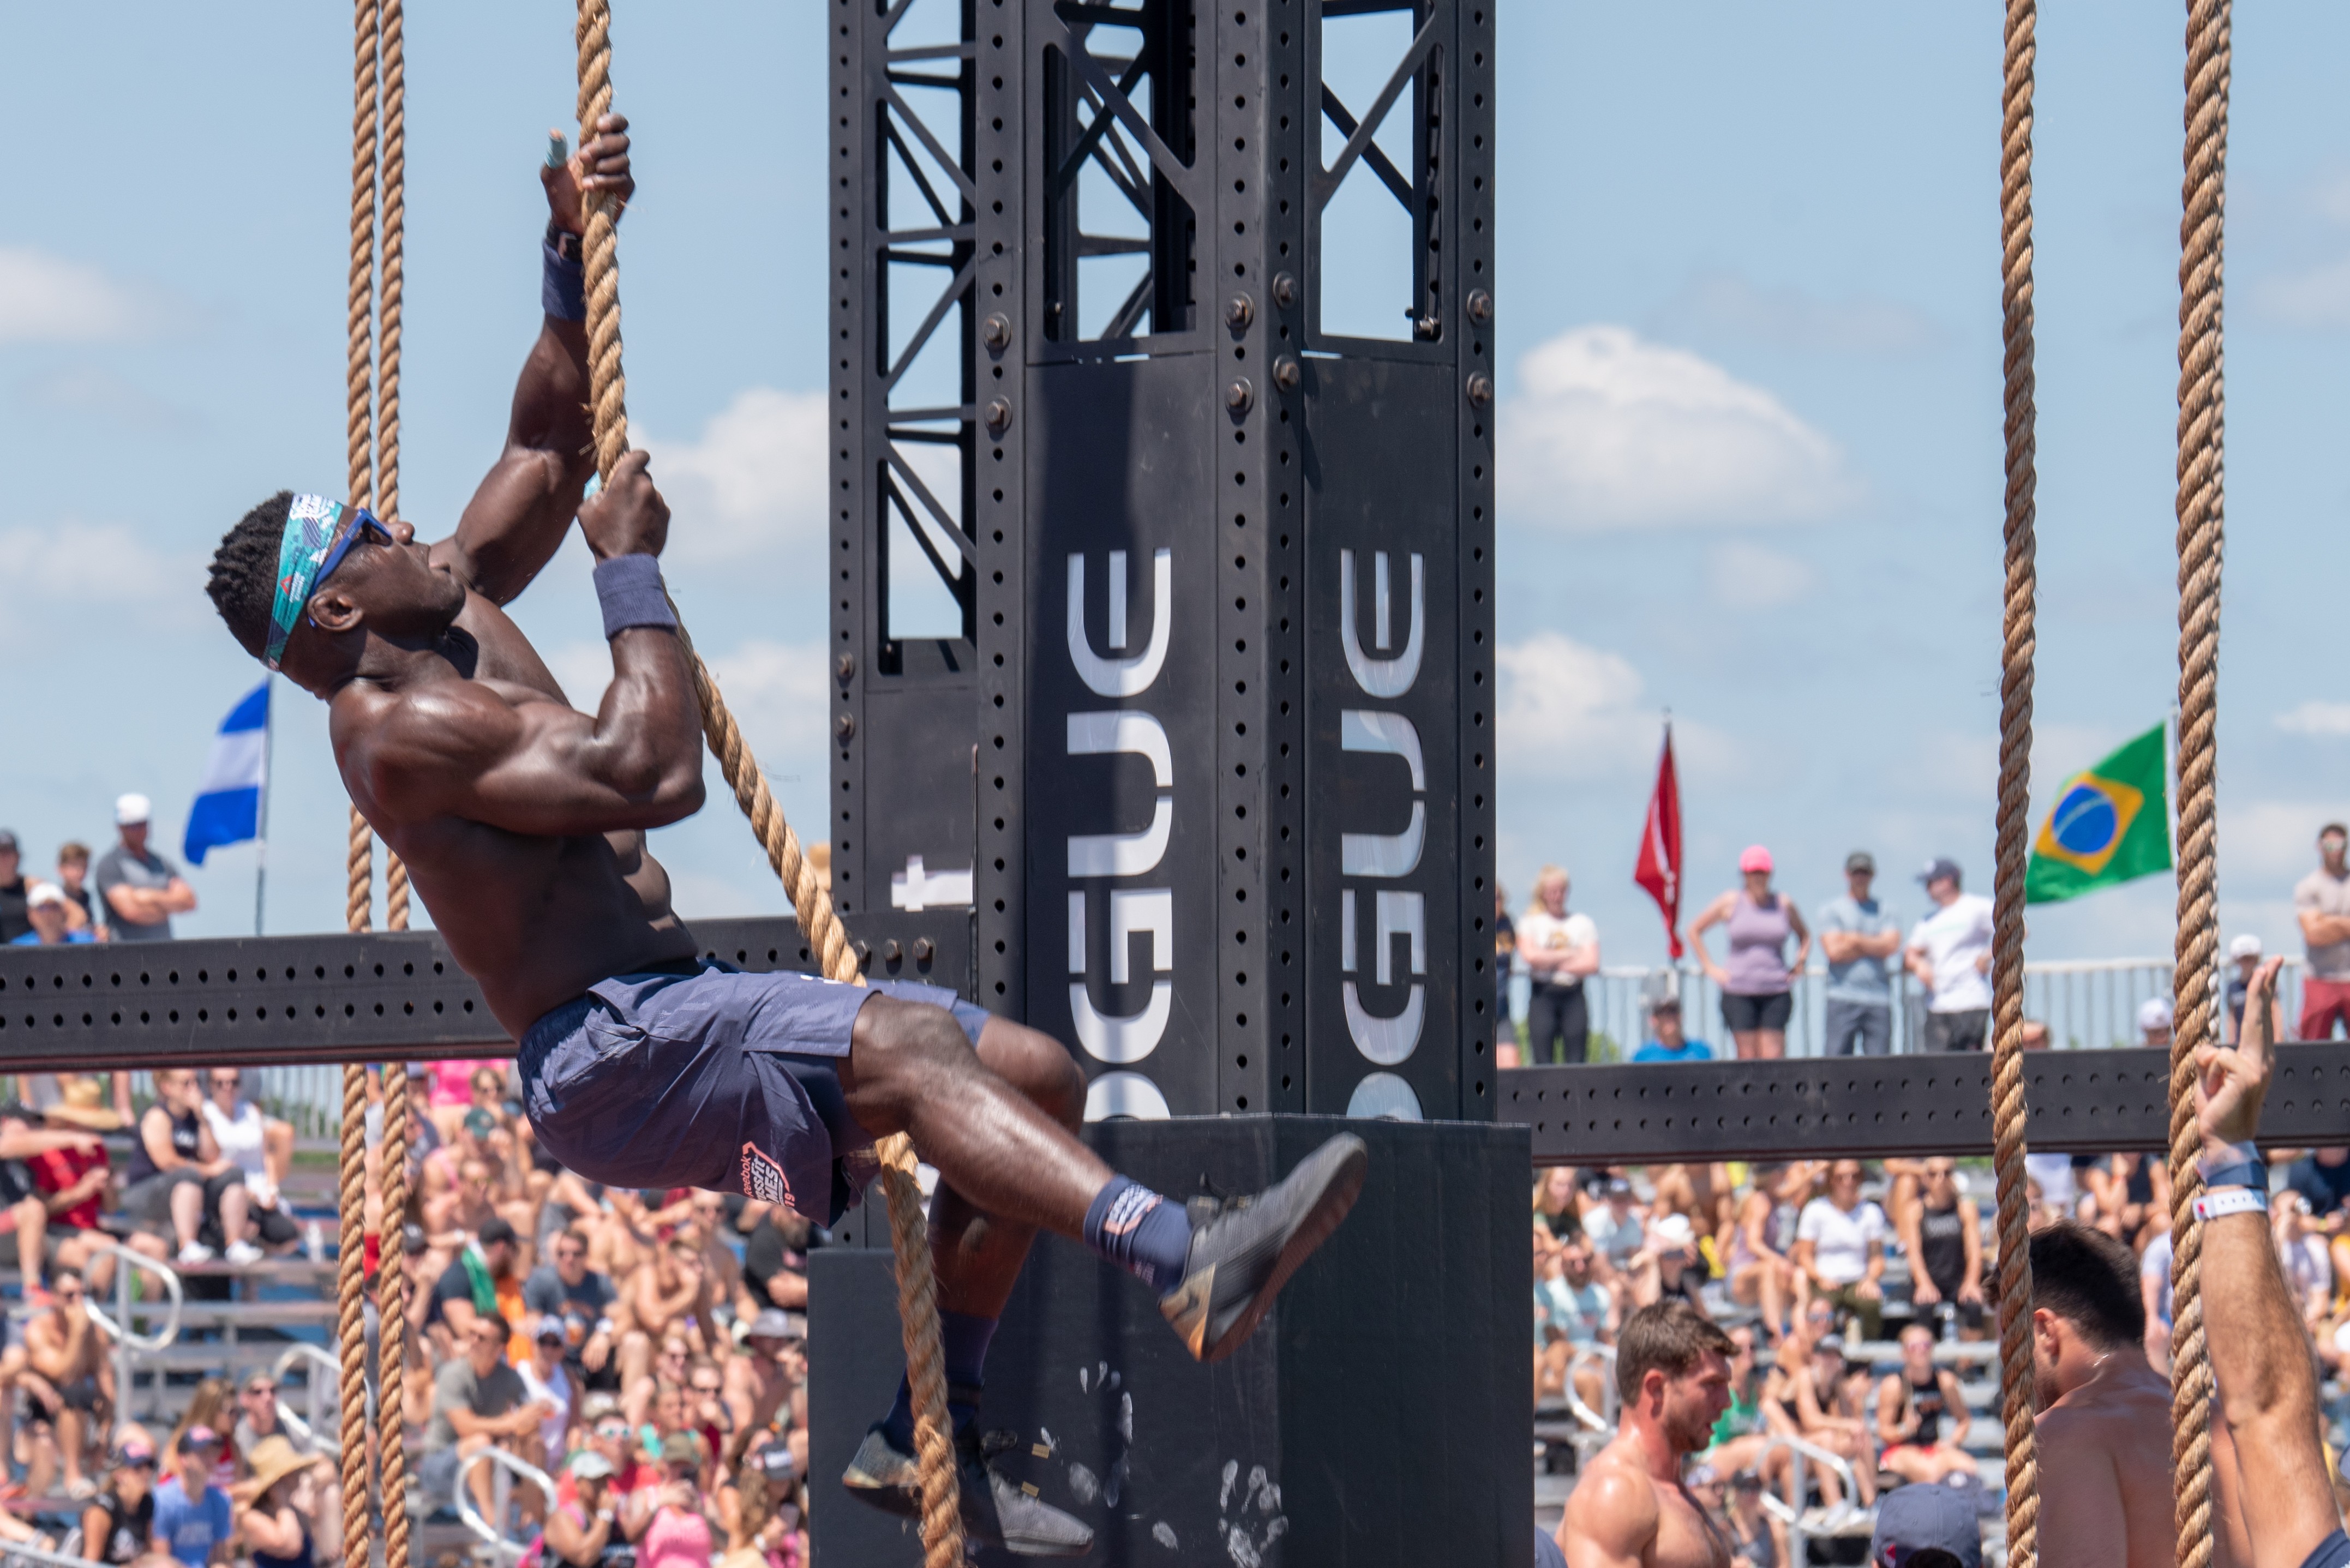 Soldiers vie in survival of the fittest at 2019 CrossFit Games